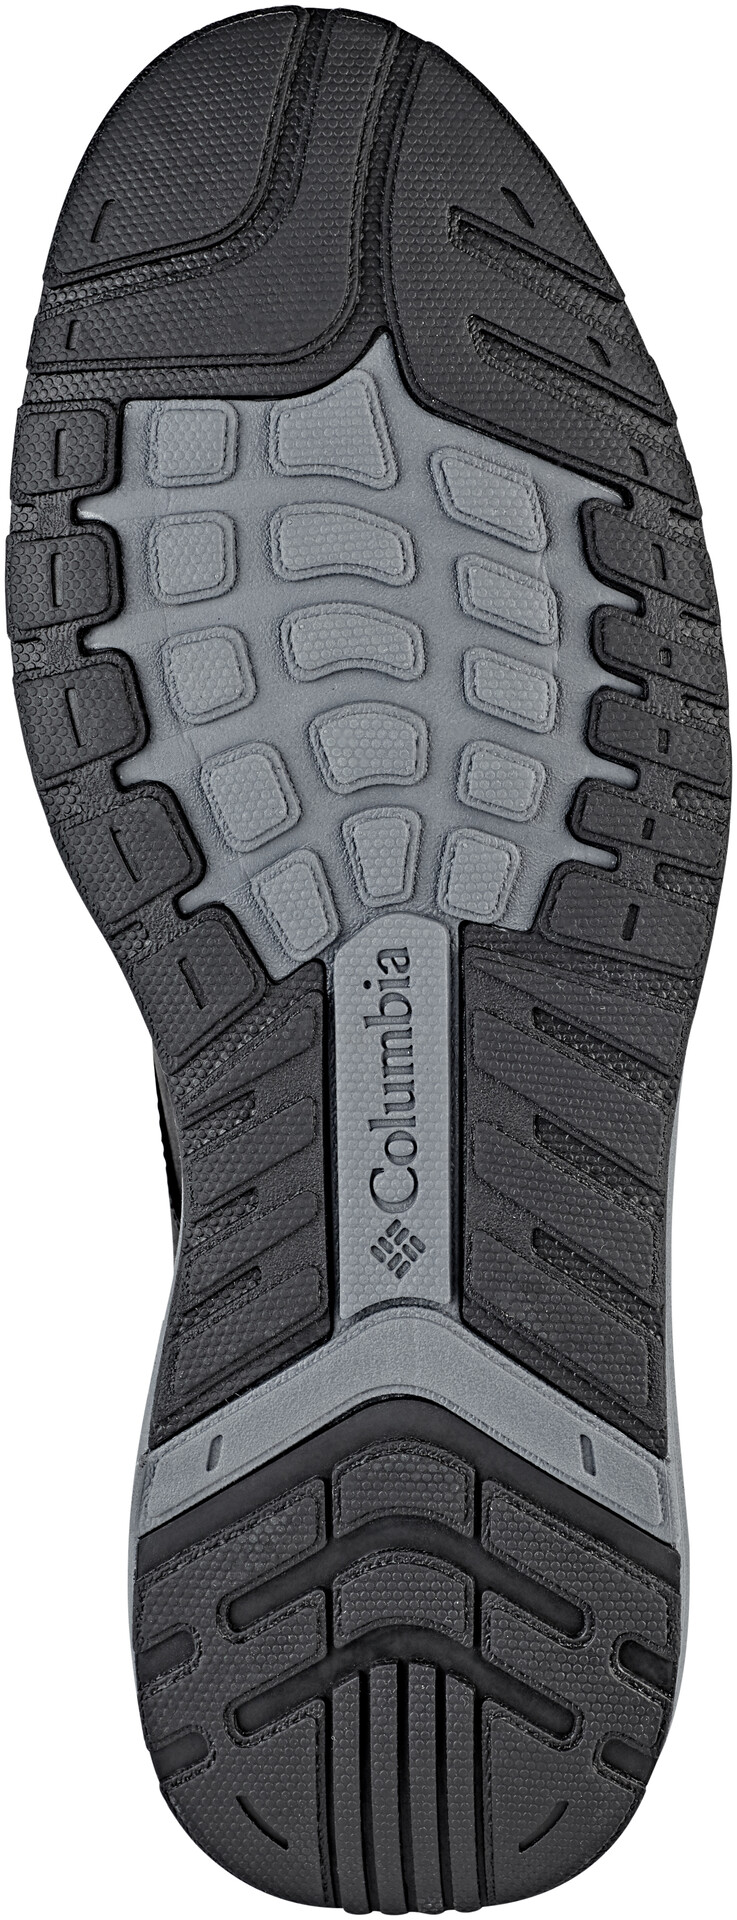 columbia rubber shoes